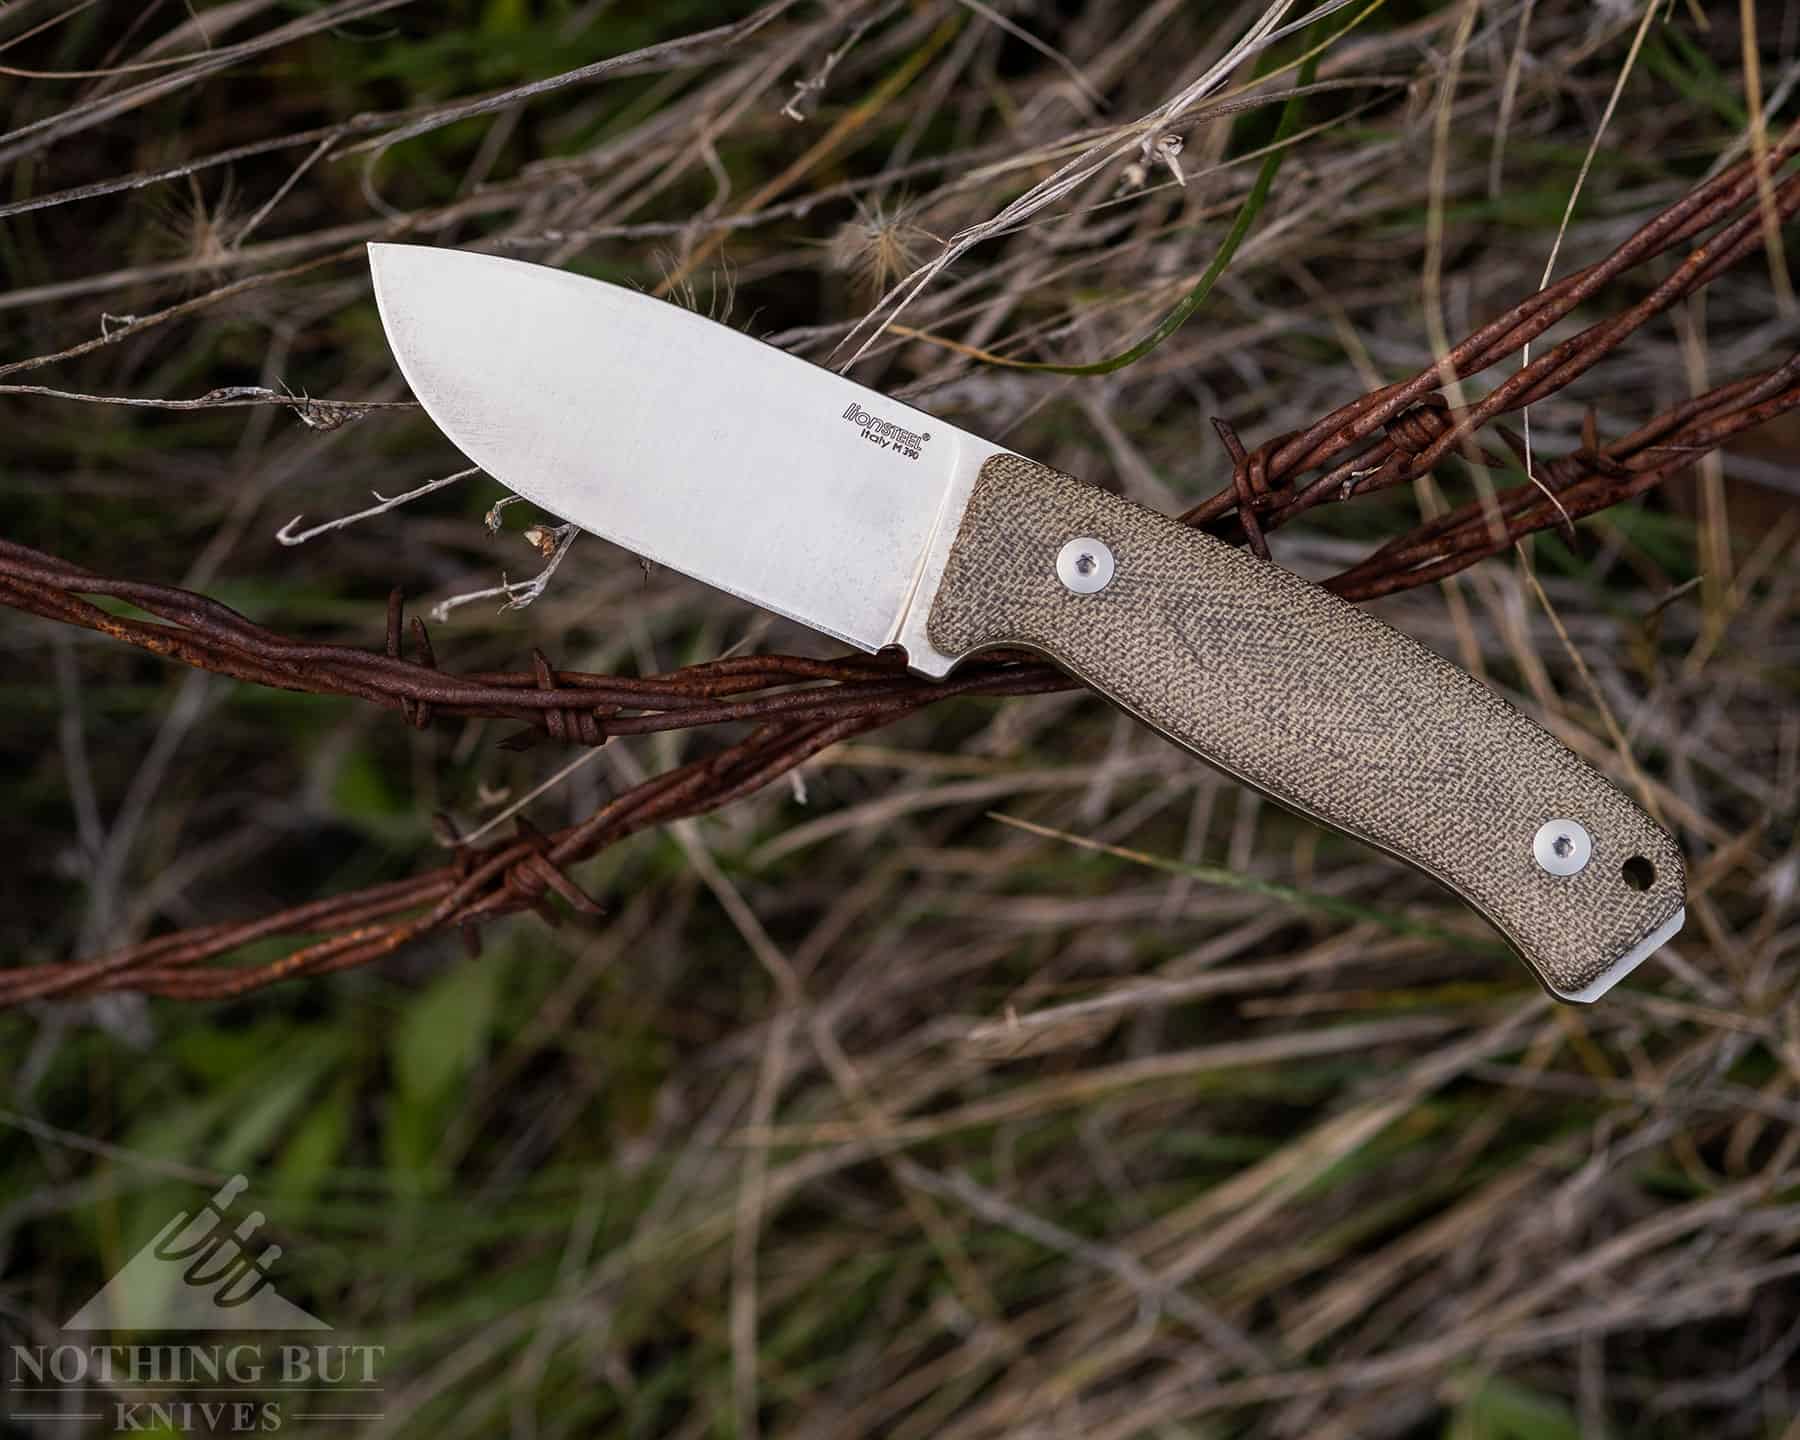 I carried and tested out the LionSteel M2M for a full month before writing this review.